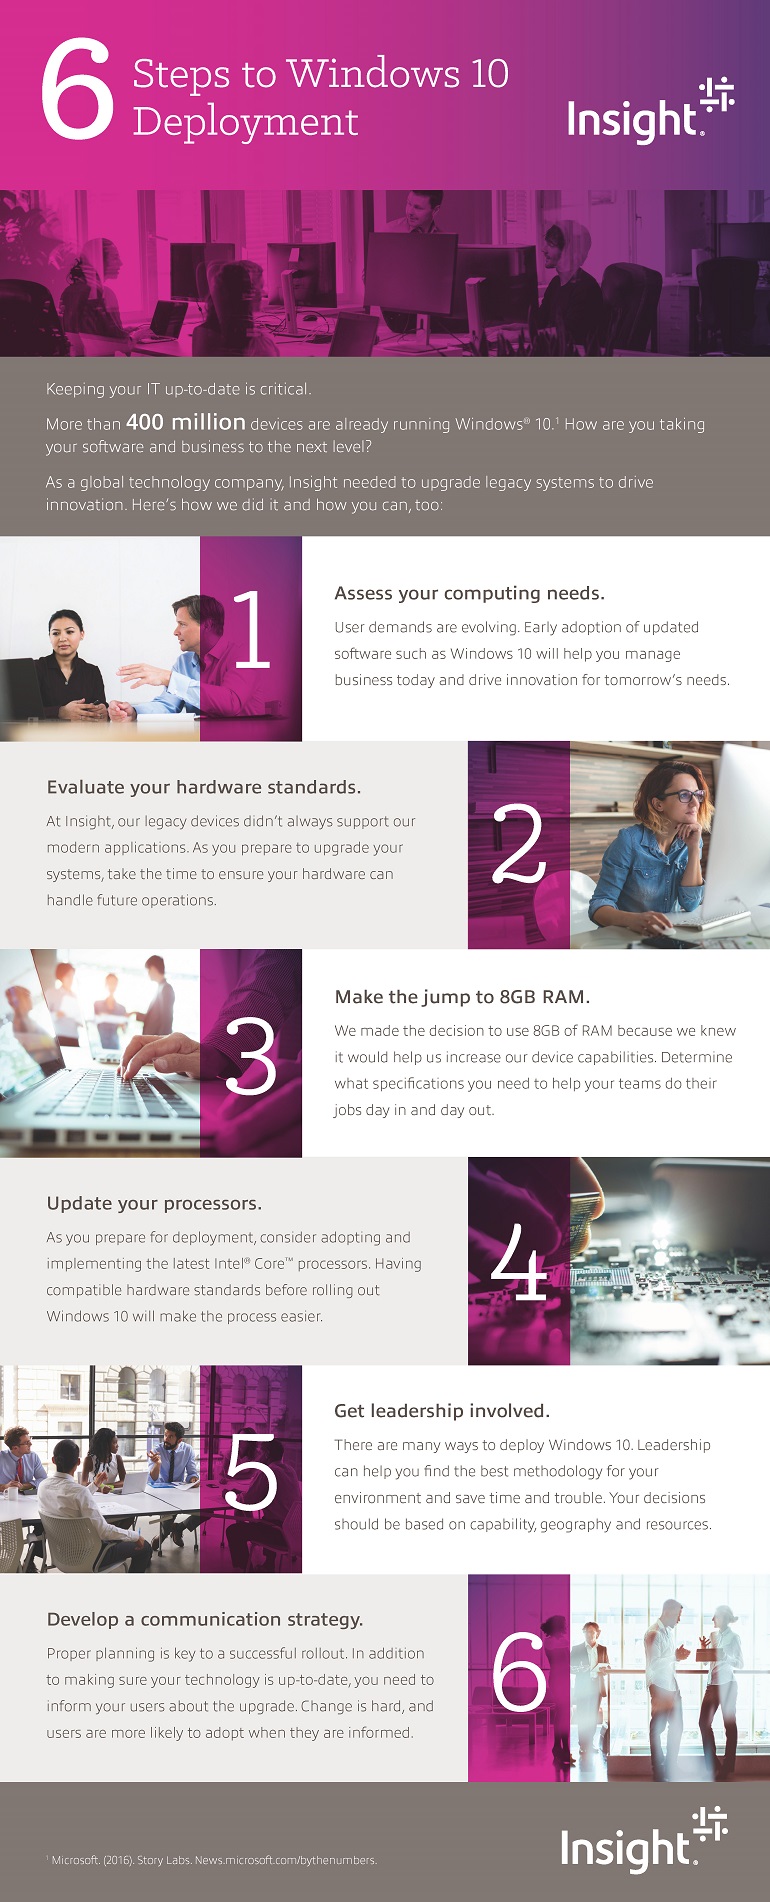 Service Provider Security Playbook Infographic